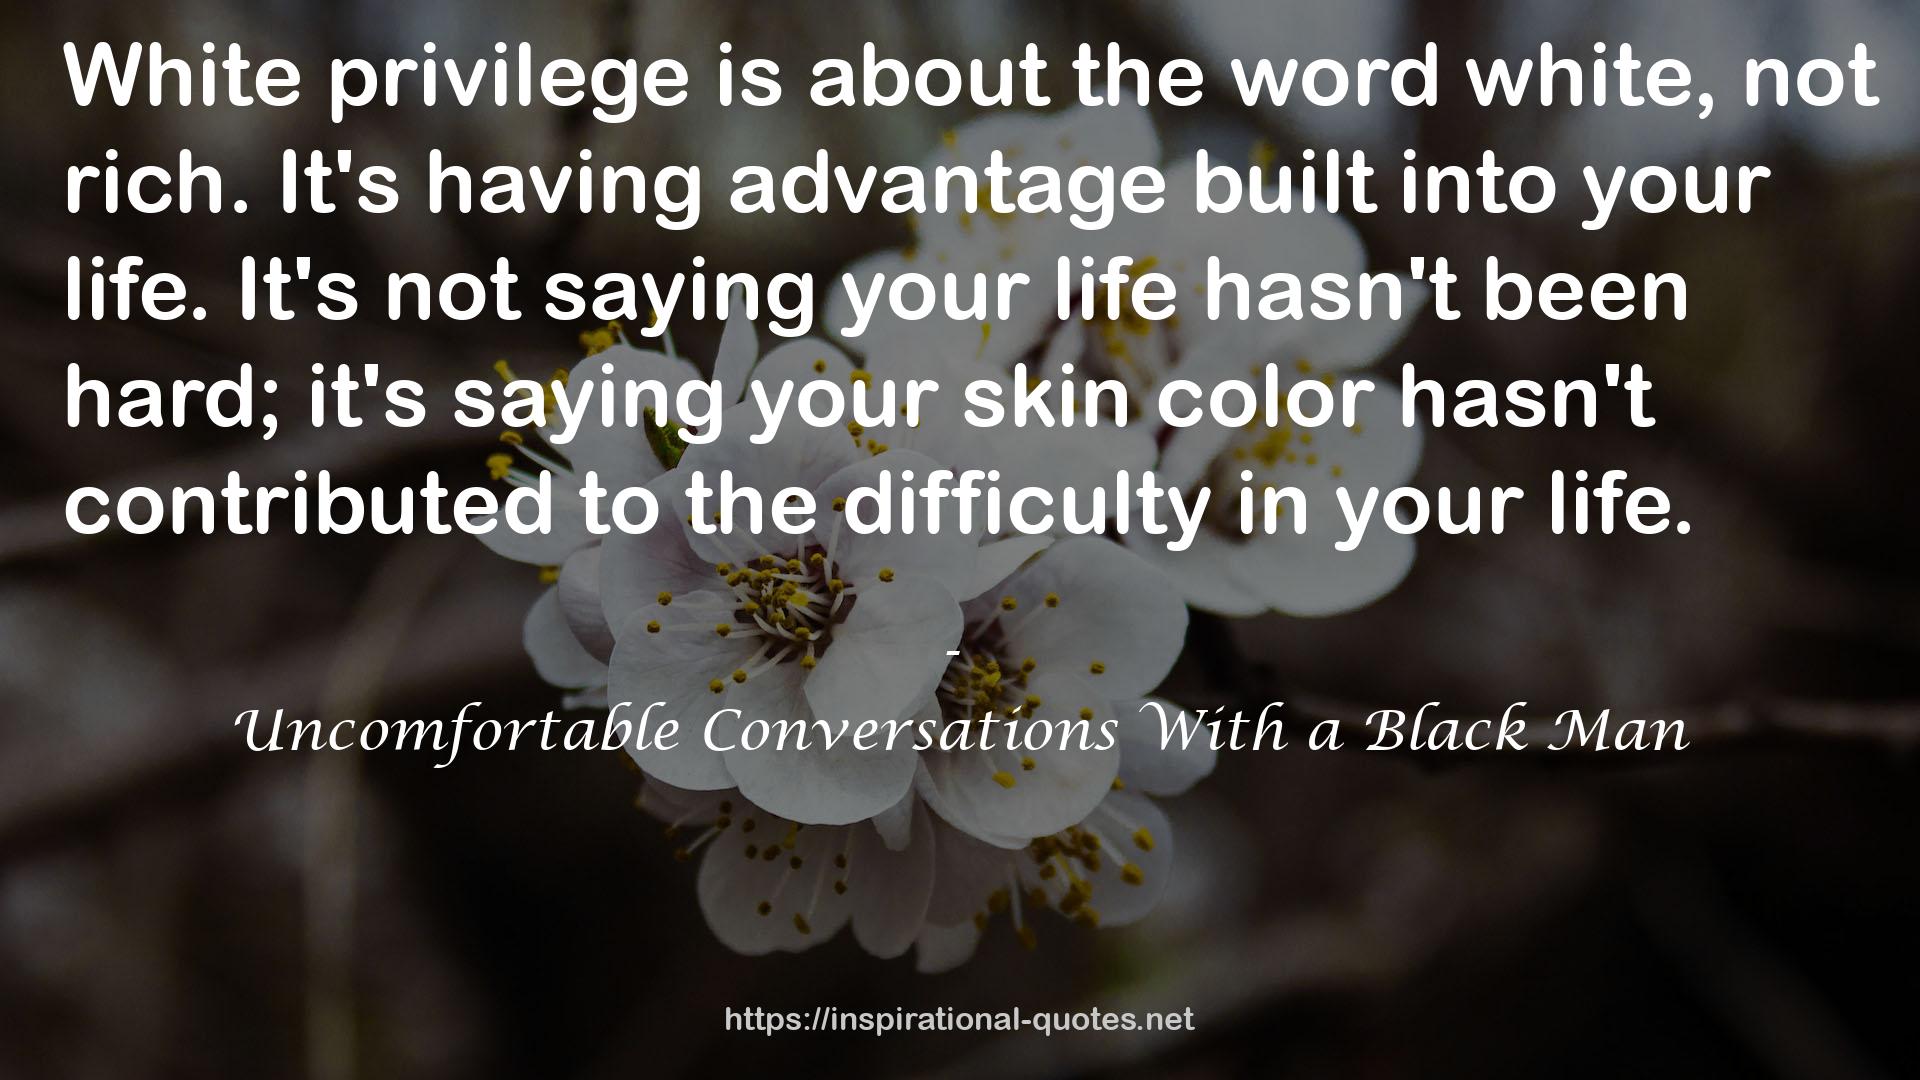 Uncomfortable Conversations With a Black Man QUOTES